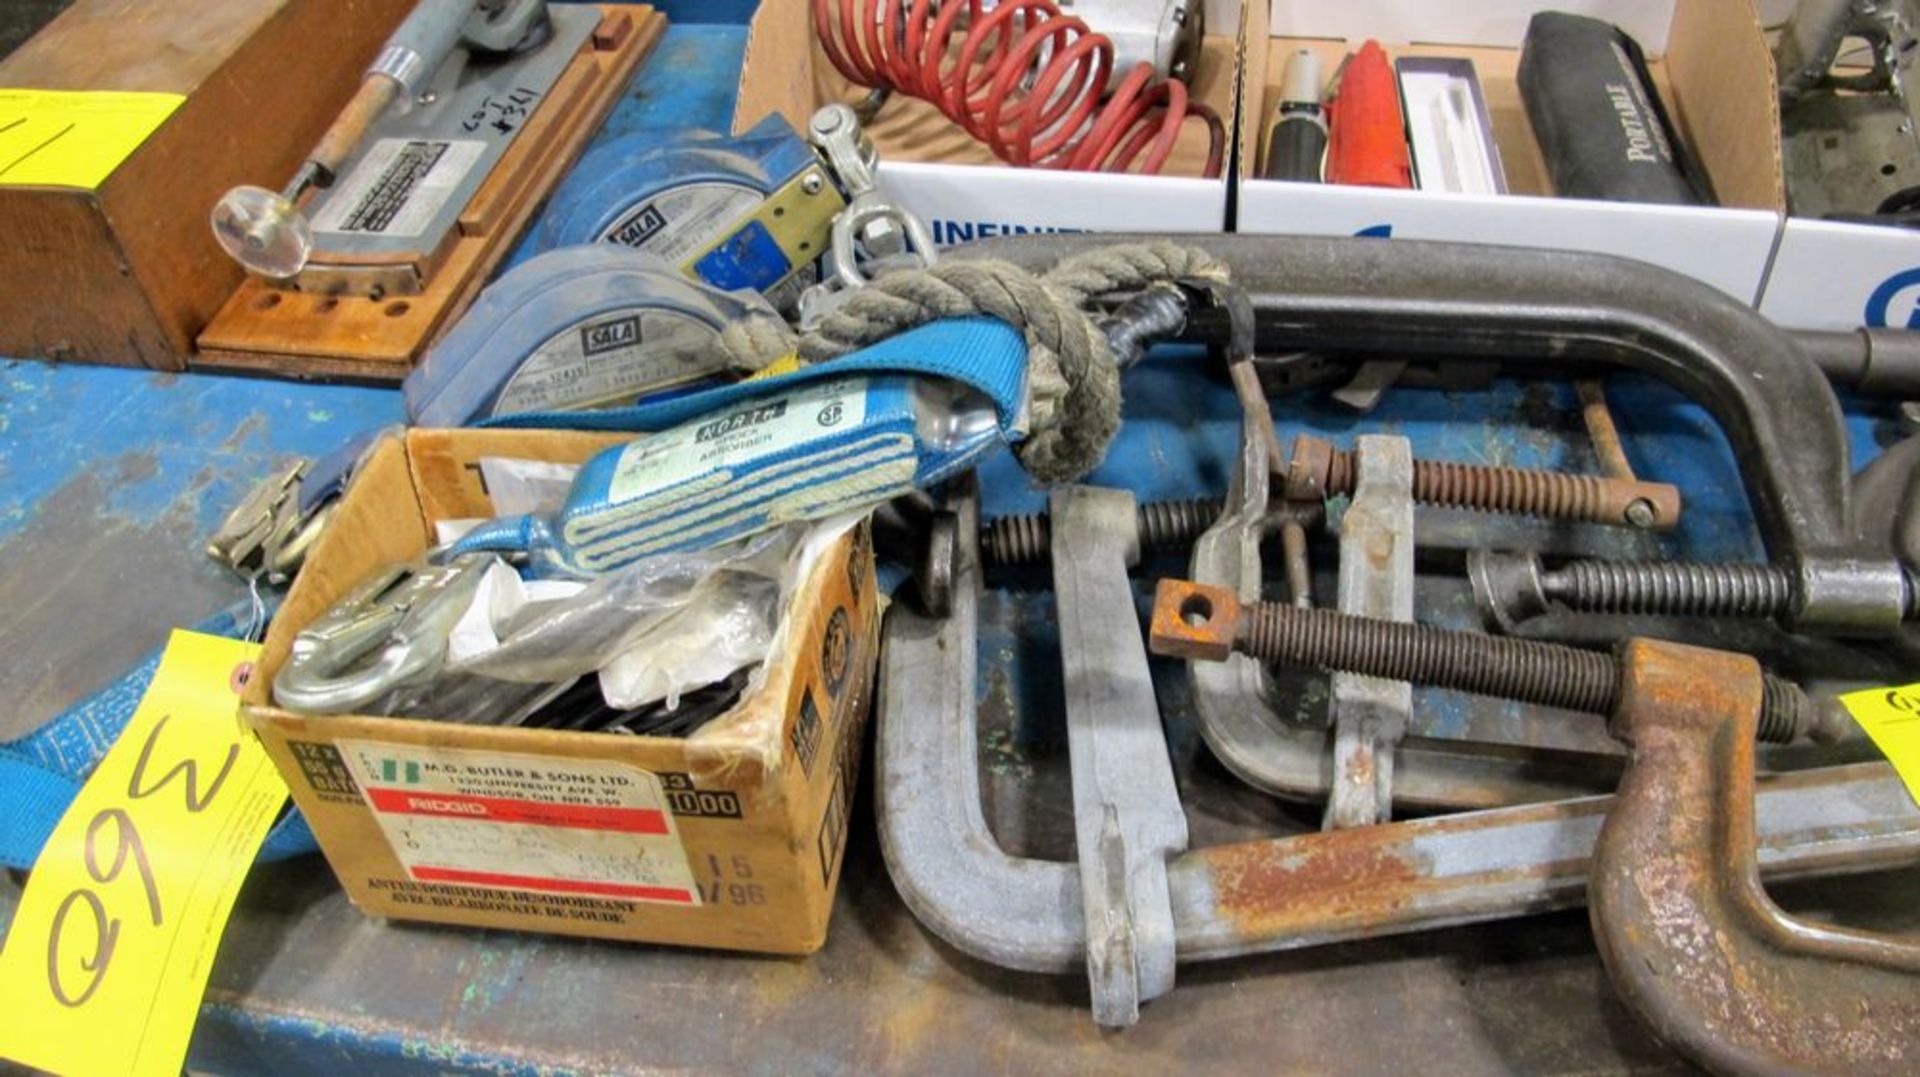 LOT ASST. POWER TOOLS, HAND TOOLS, CLAMPS, ETC. - Image 2 of 3